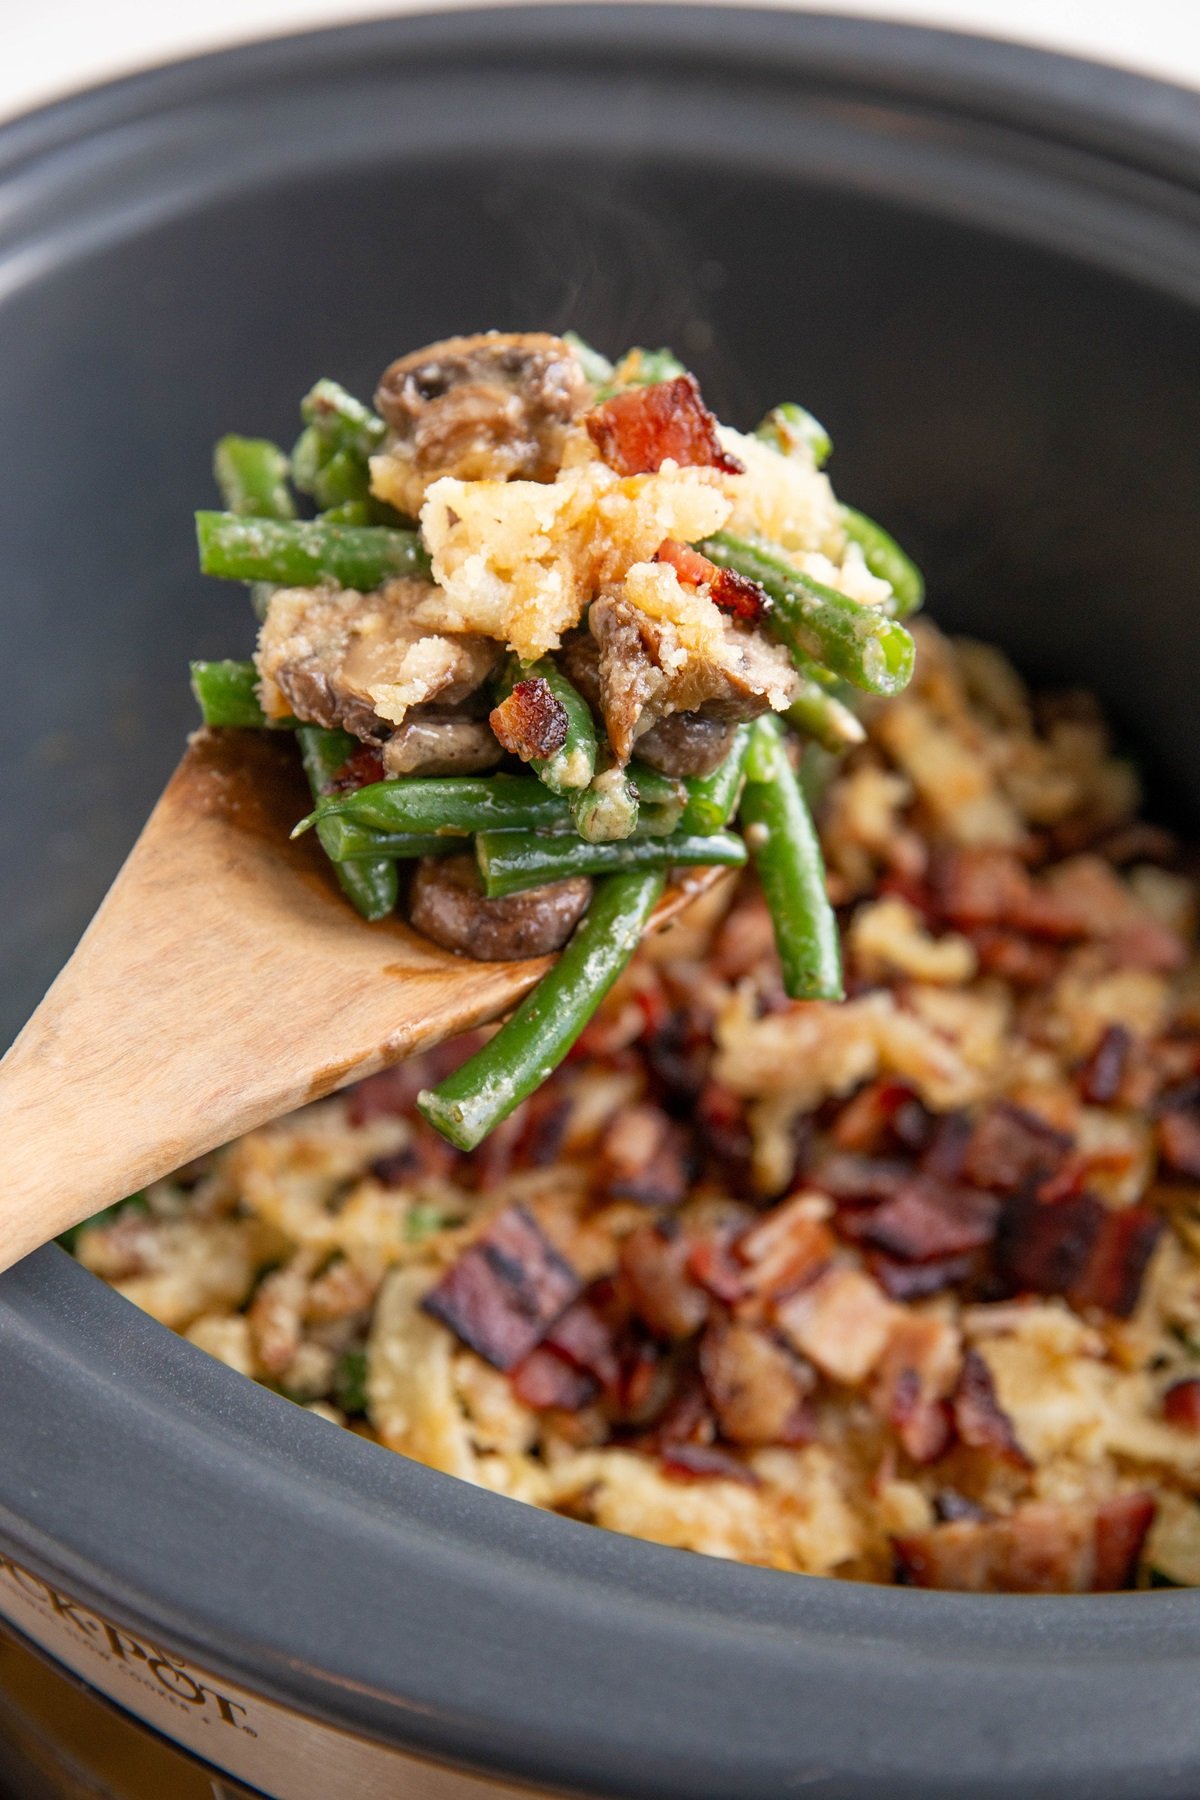 Wooden spoon scooping some green bean casserole out of the slow cooker.